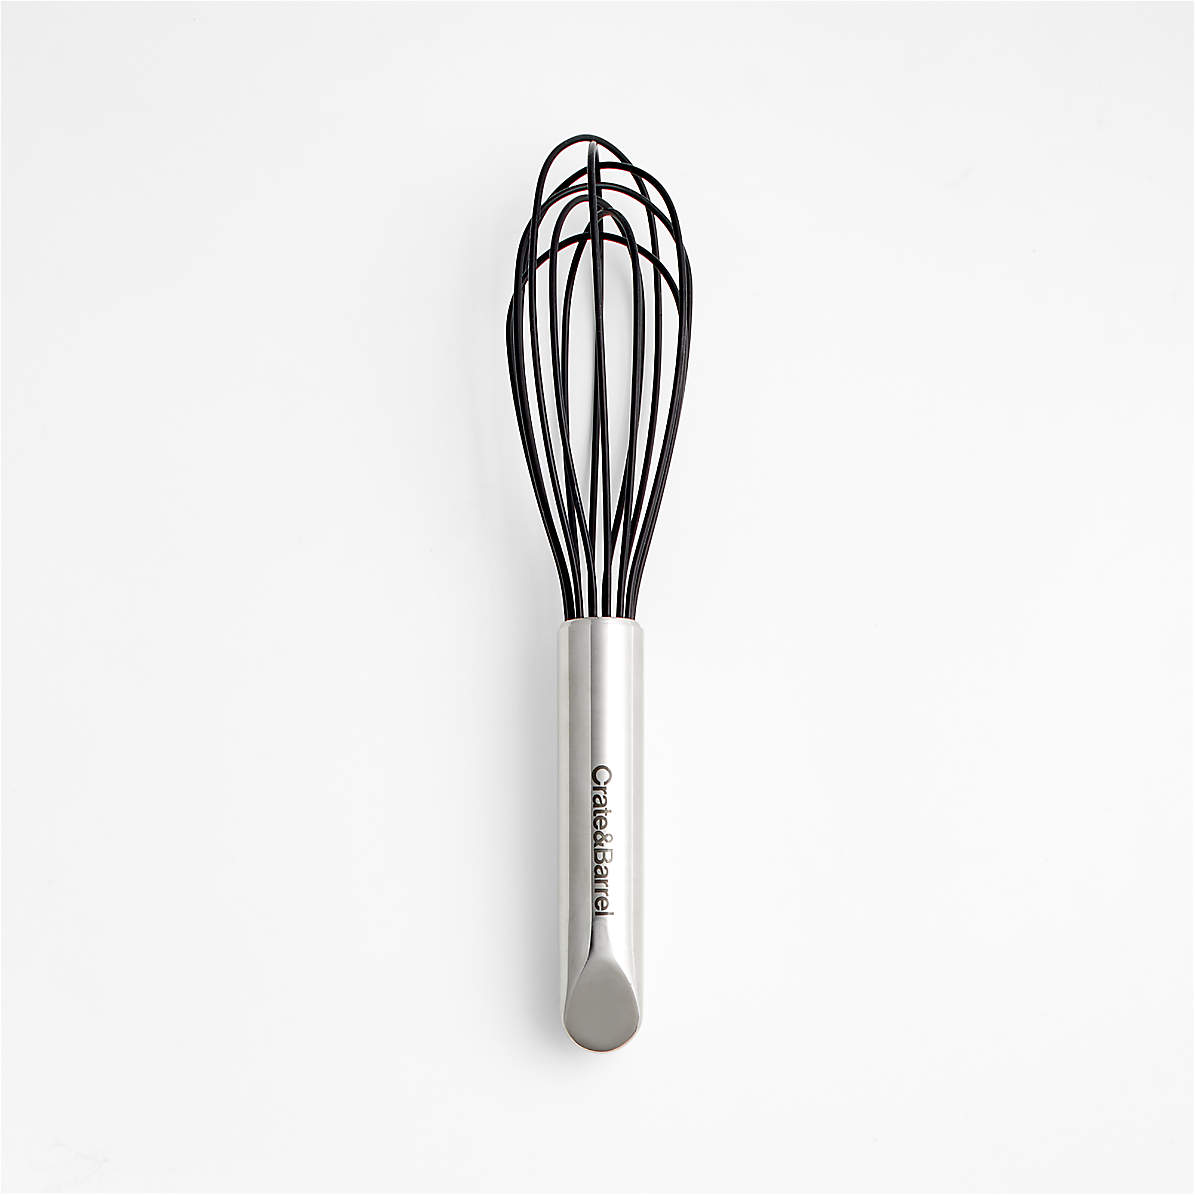 Tovolo 6 Mini Stainless Steel Whisk - Small Kitchen Gadget & Utensil for  Baking, Cooking, Whipping, Mixing, Egg Beating, & Essentials /